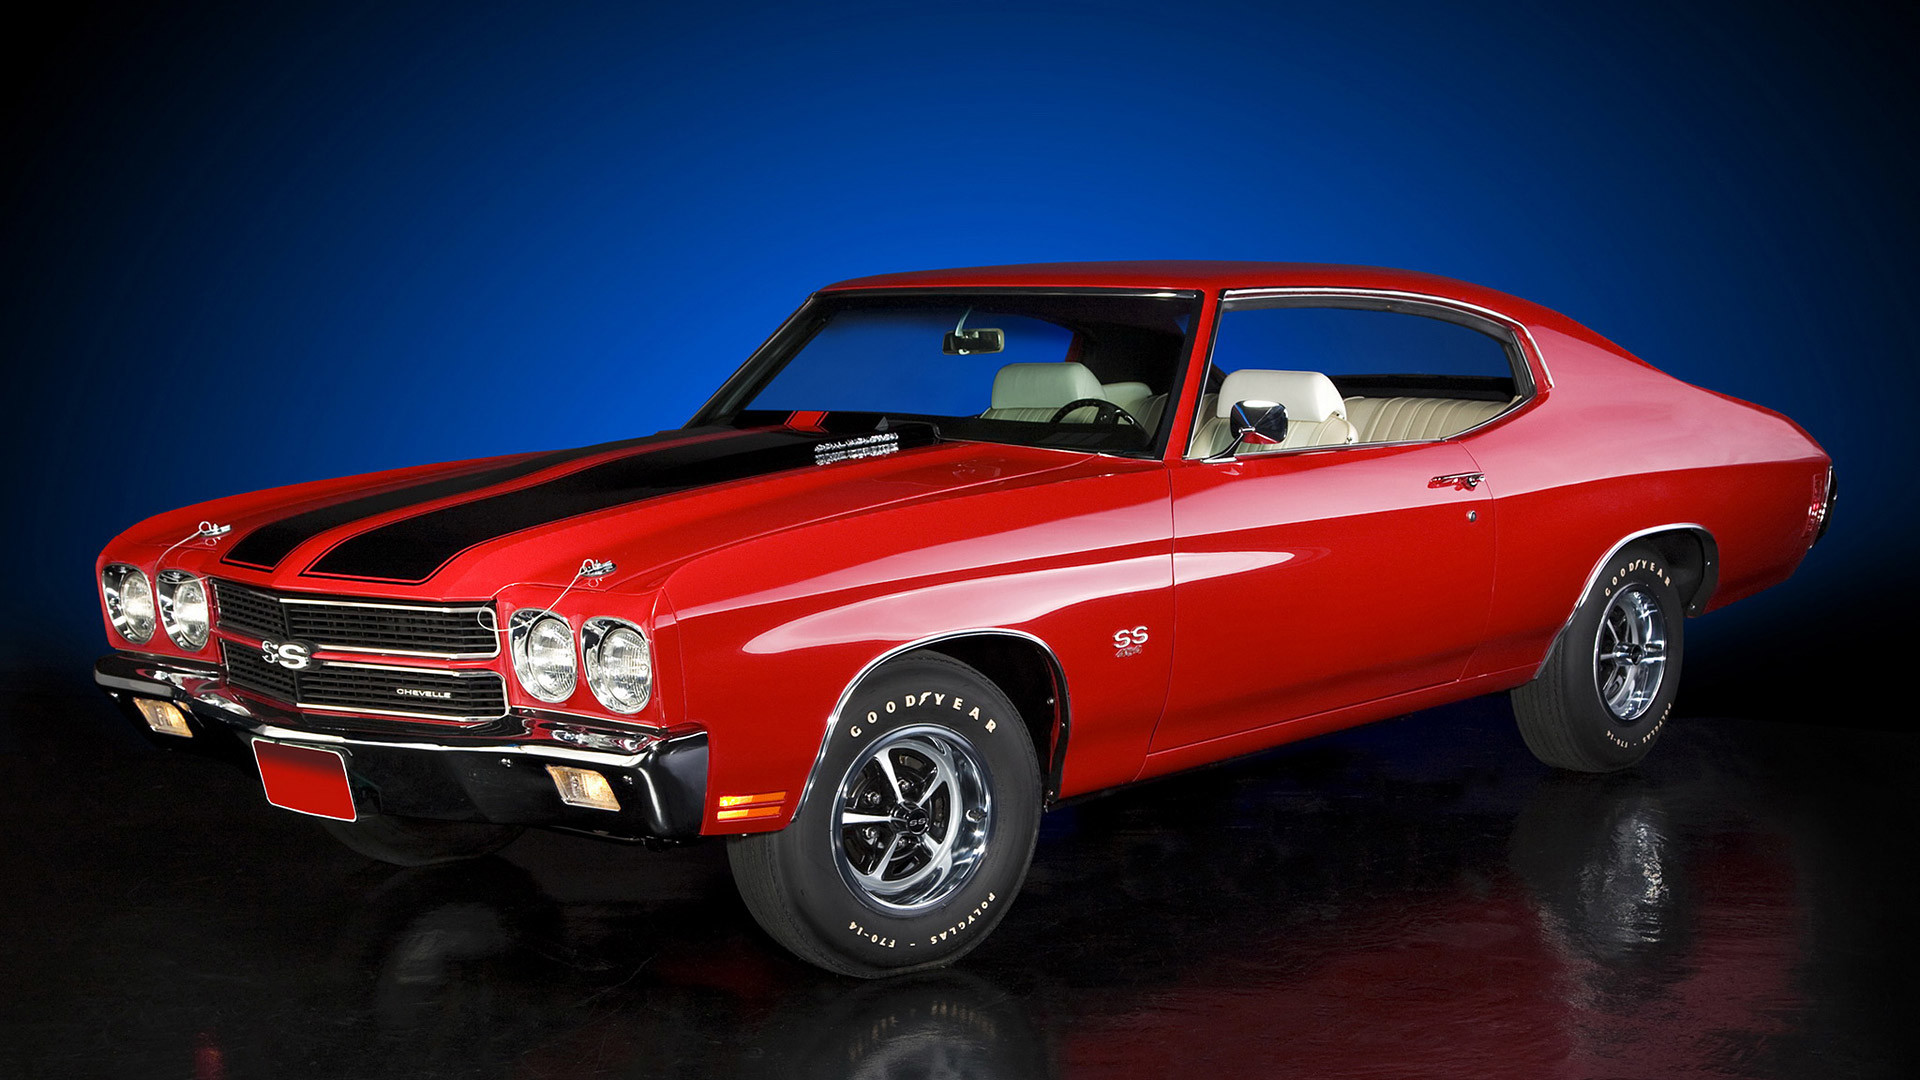 1920x1080 1970 Chevrolet Chevelle SS Coupe picture.